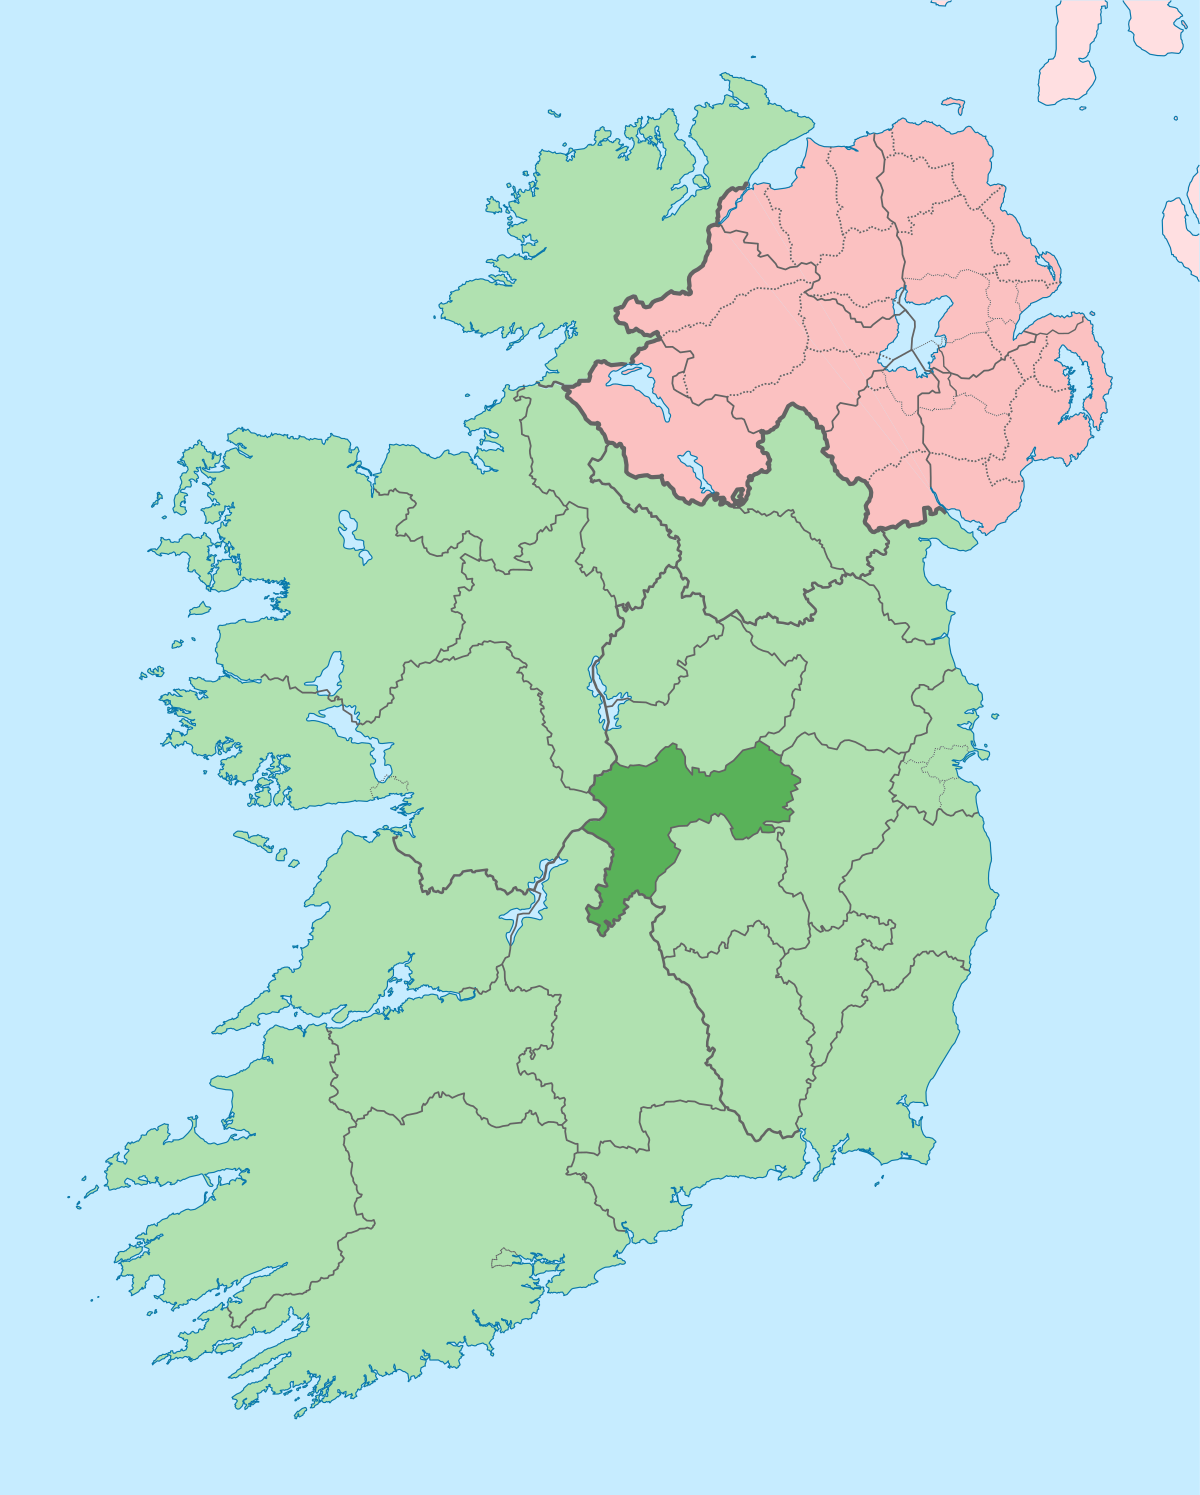 Buildings of Central Leinster: Kildare, Laois and Offaly. By 